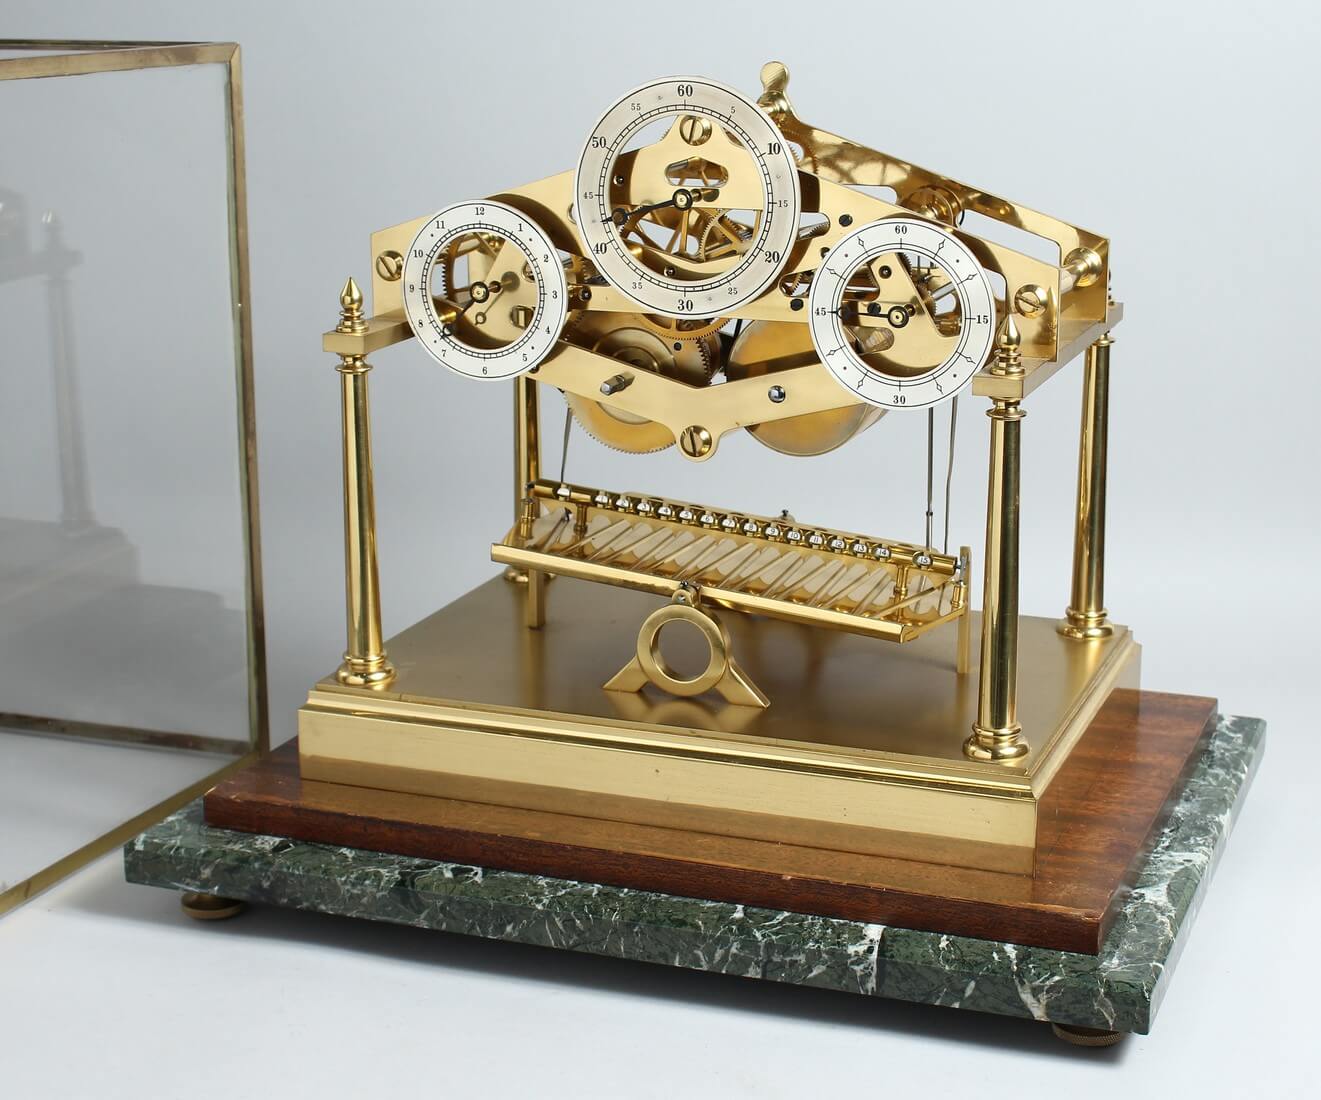 Andrew Fell, a limited edition lacquered brass architectural design rolling ball clock, with three silvered chapter rings,